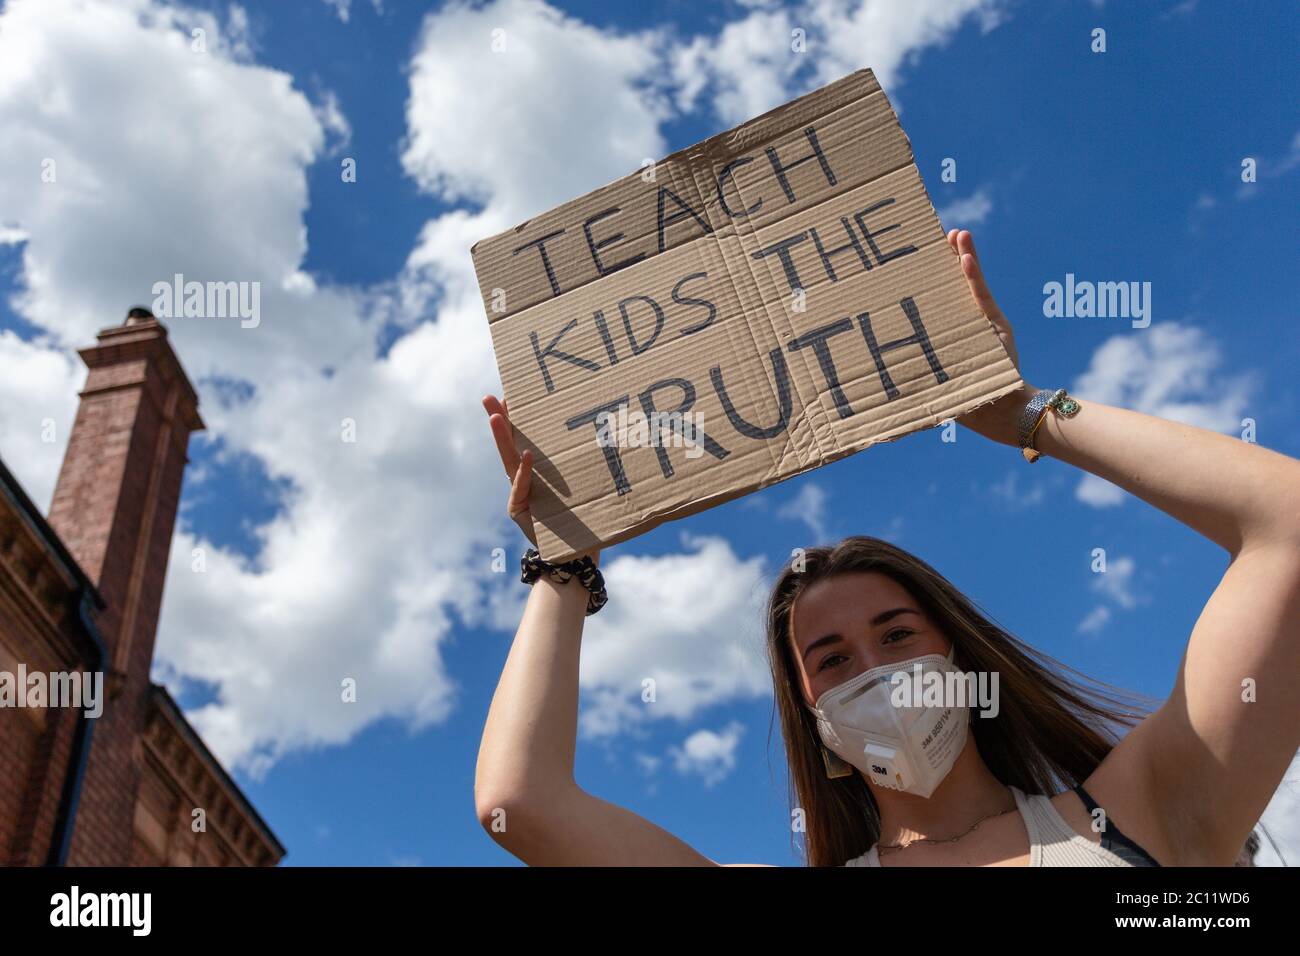 Stourbridge, West Midlands, UK. 13th June, 2020. A lively but peaceful gathering of at least 200 people demonstrated for the Black Lives Matter in the town of Stourbridge, West Midlands, UK. Credit: Peter Lopeman/Alamy Live News Stock Photo